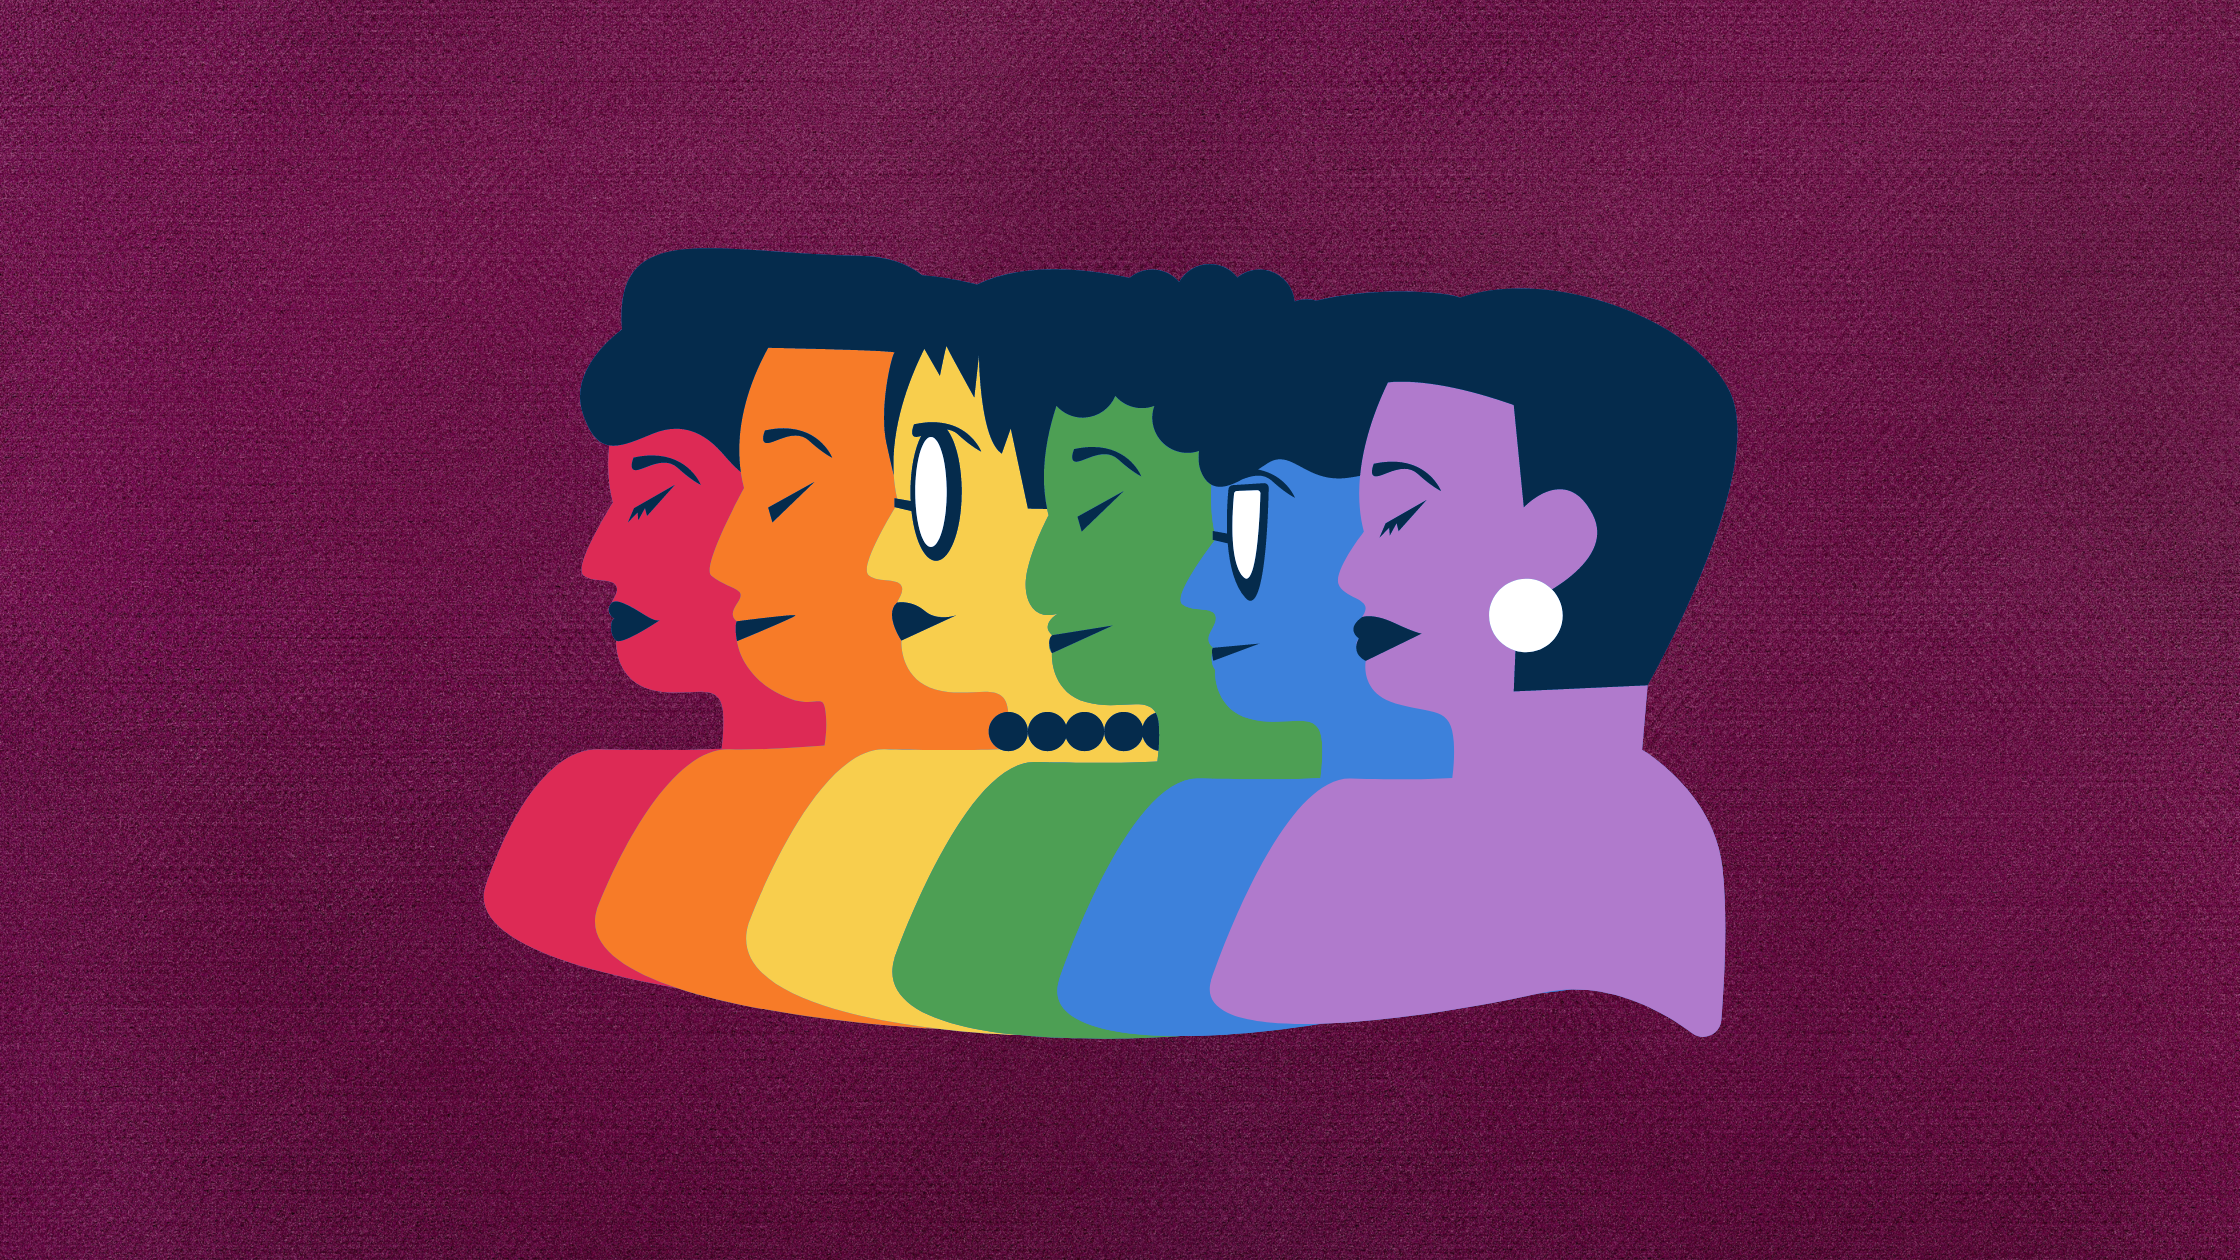 Purple background with a sticker including several faces, each a different color of the rainbow.